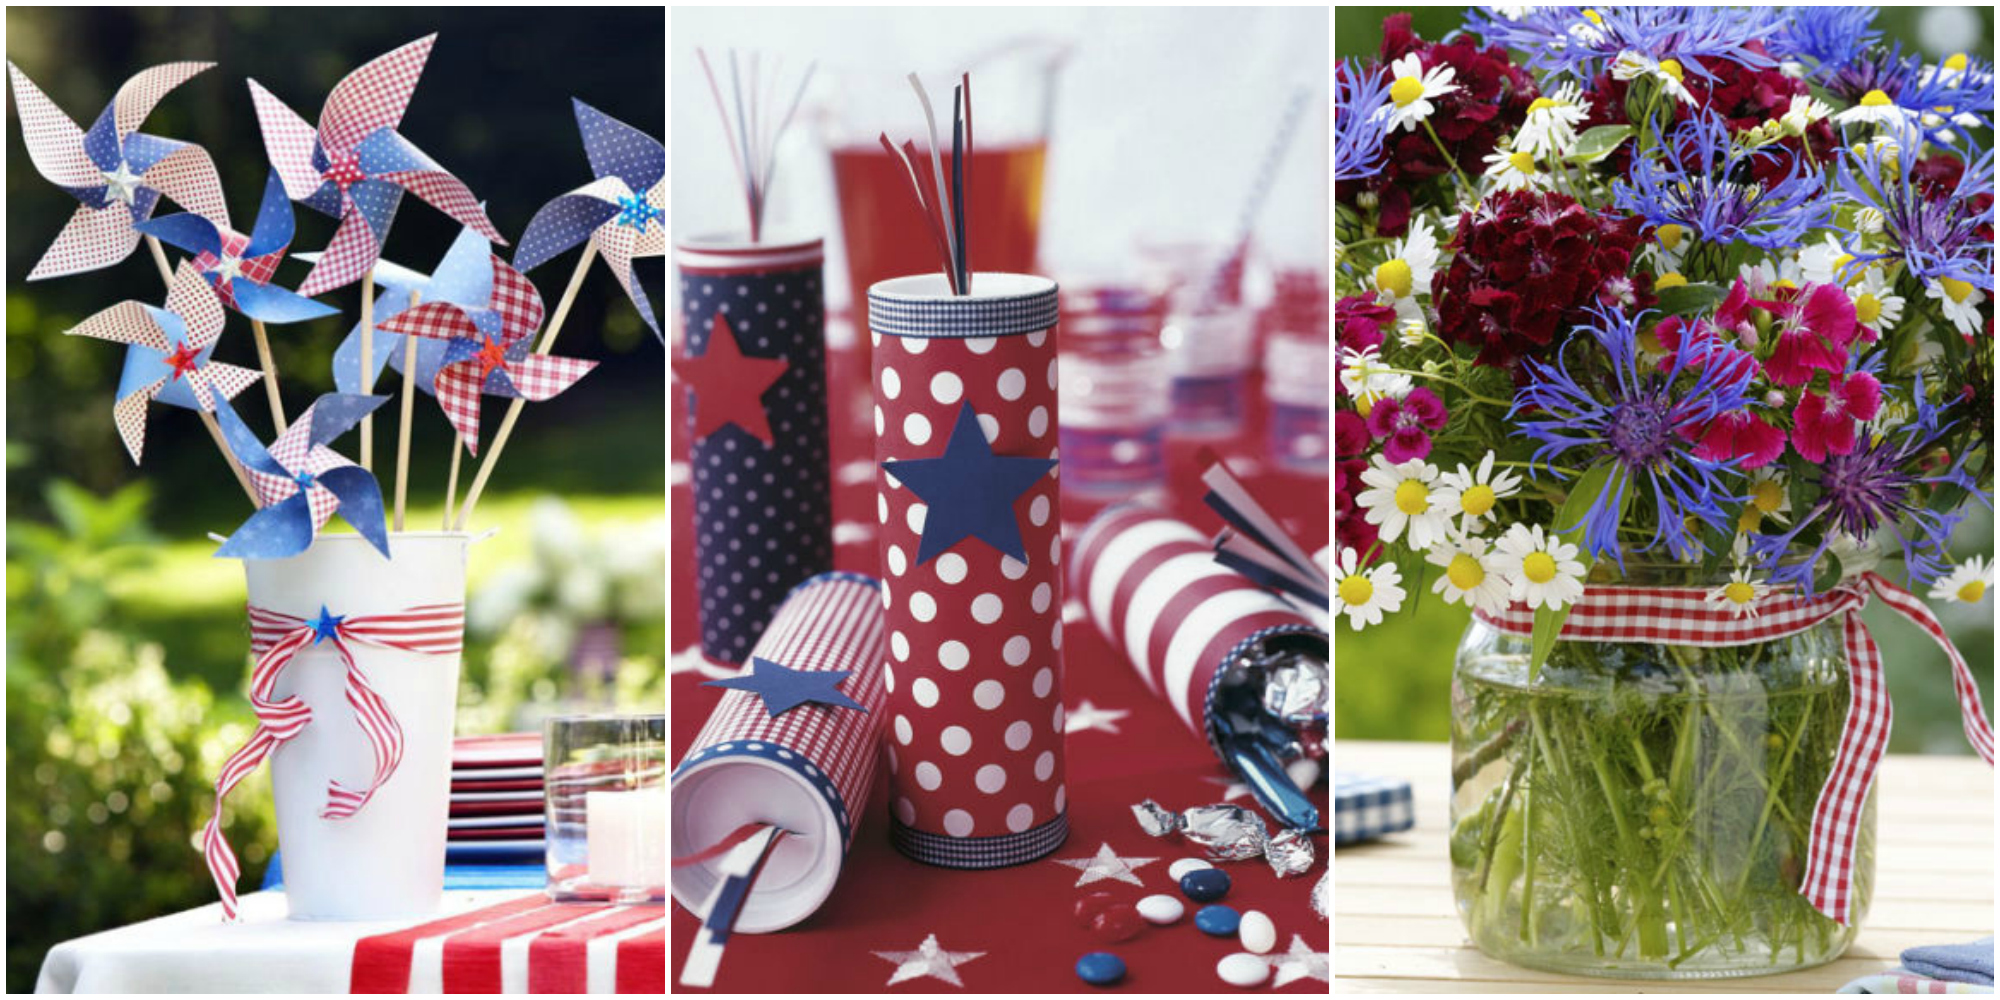 1462467525-fourth-of-july-decorations